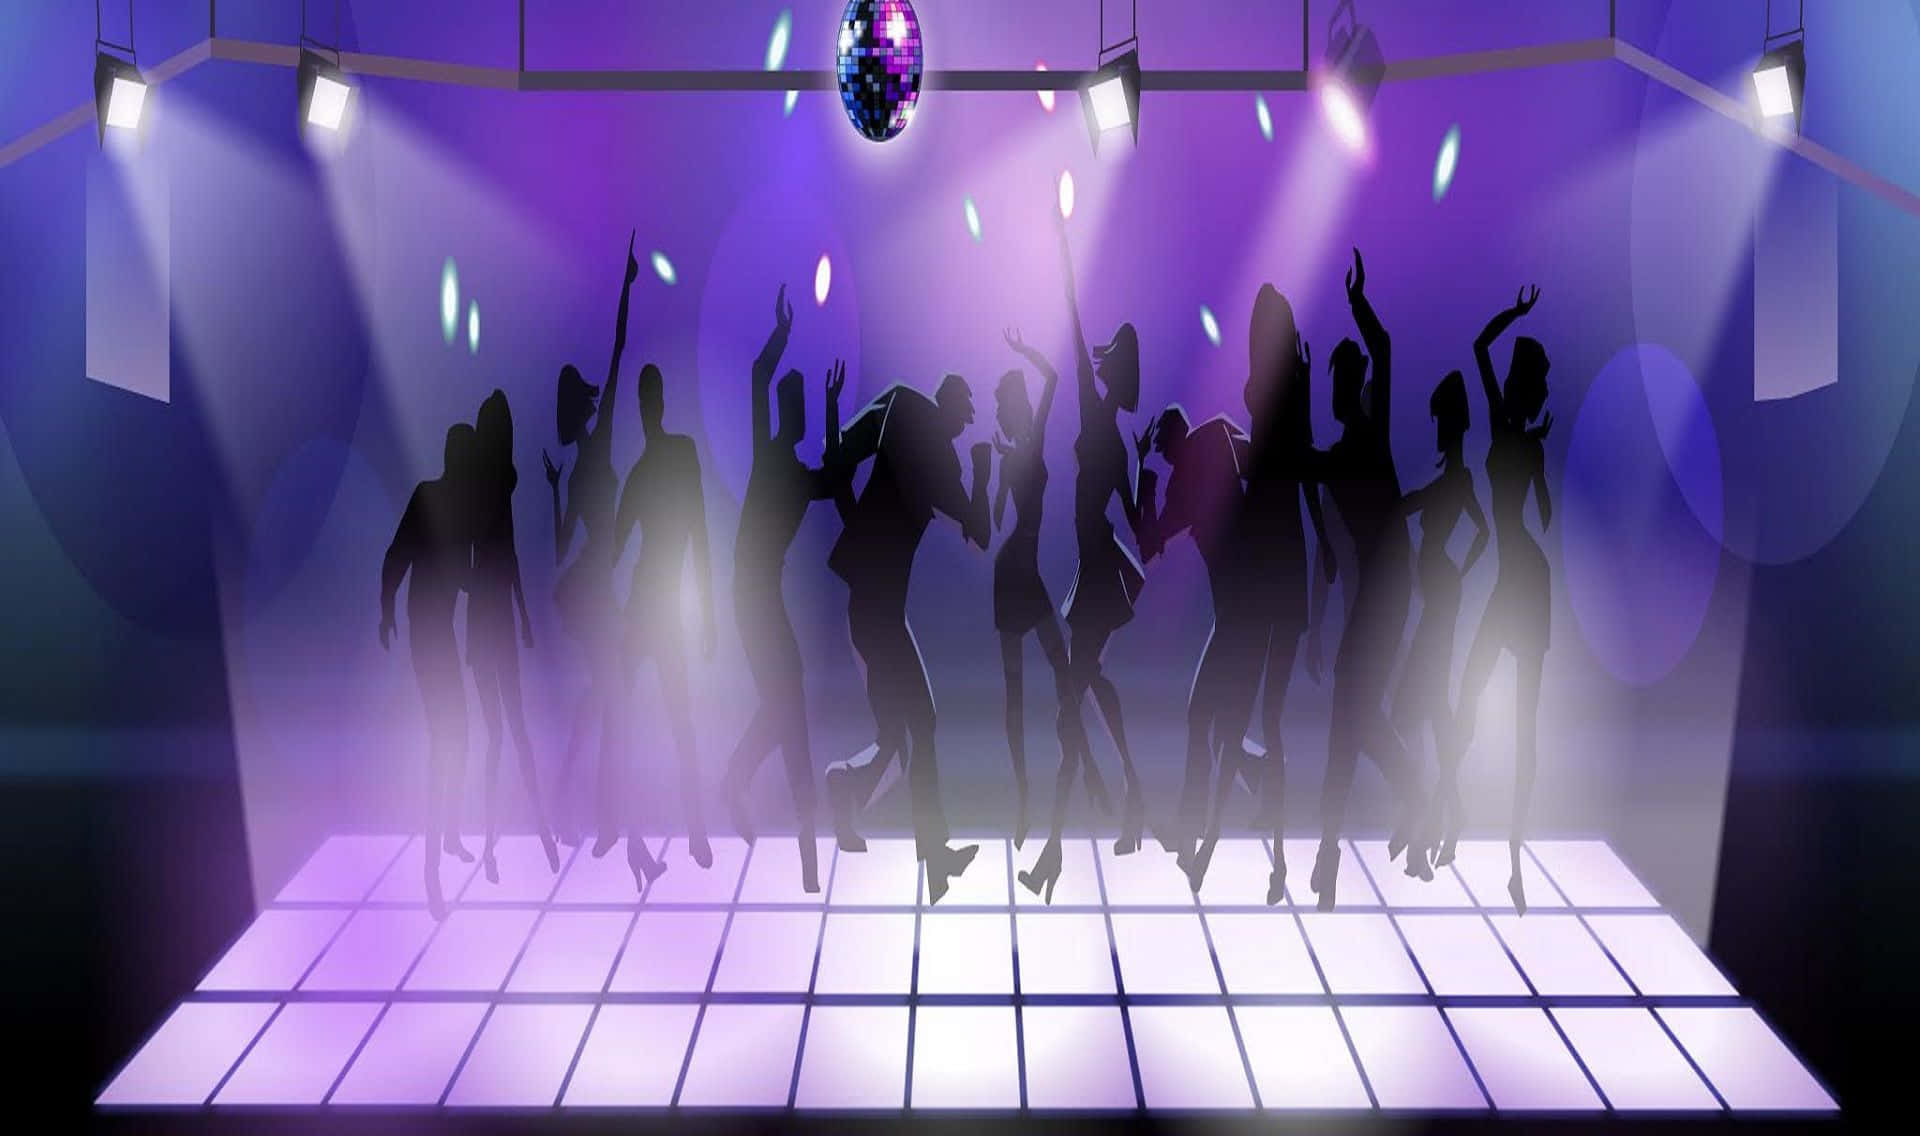 Get ready to party the night away at a vibrant, electrifying club party